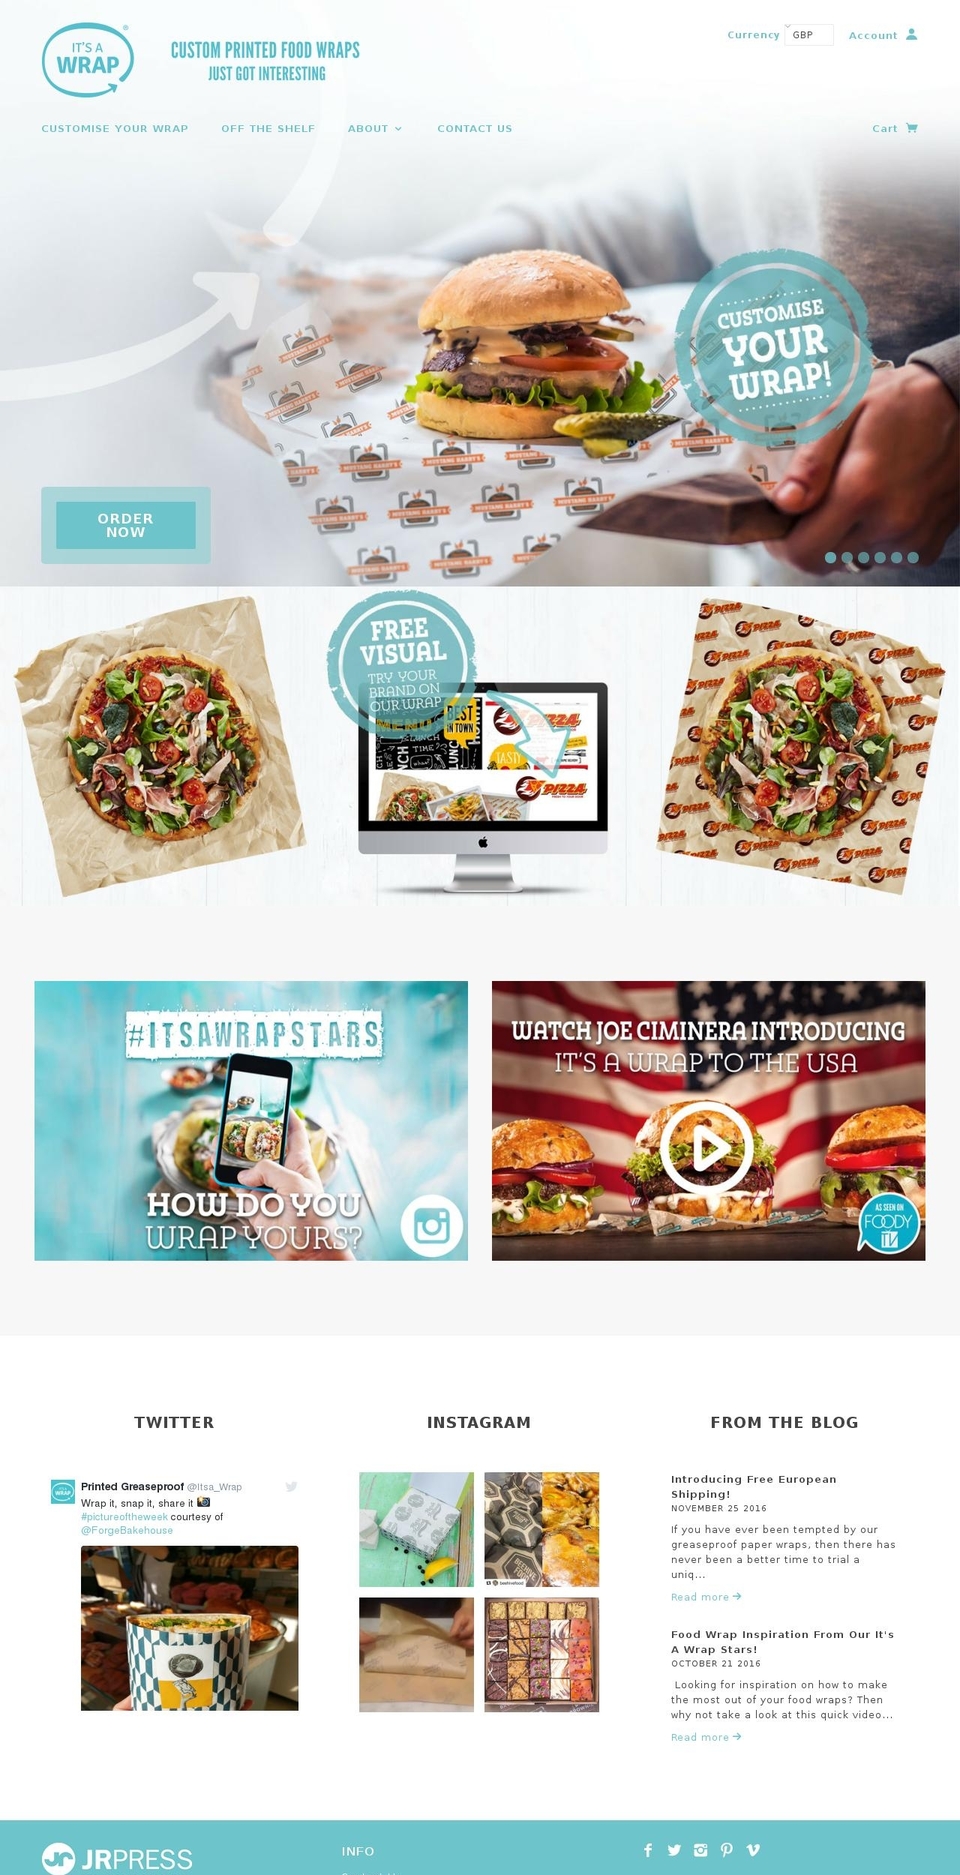 Galleria Shopify theme site example printedgreaseproof.com